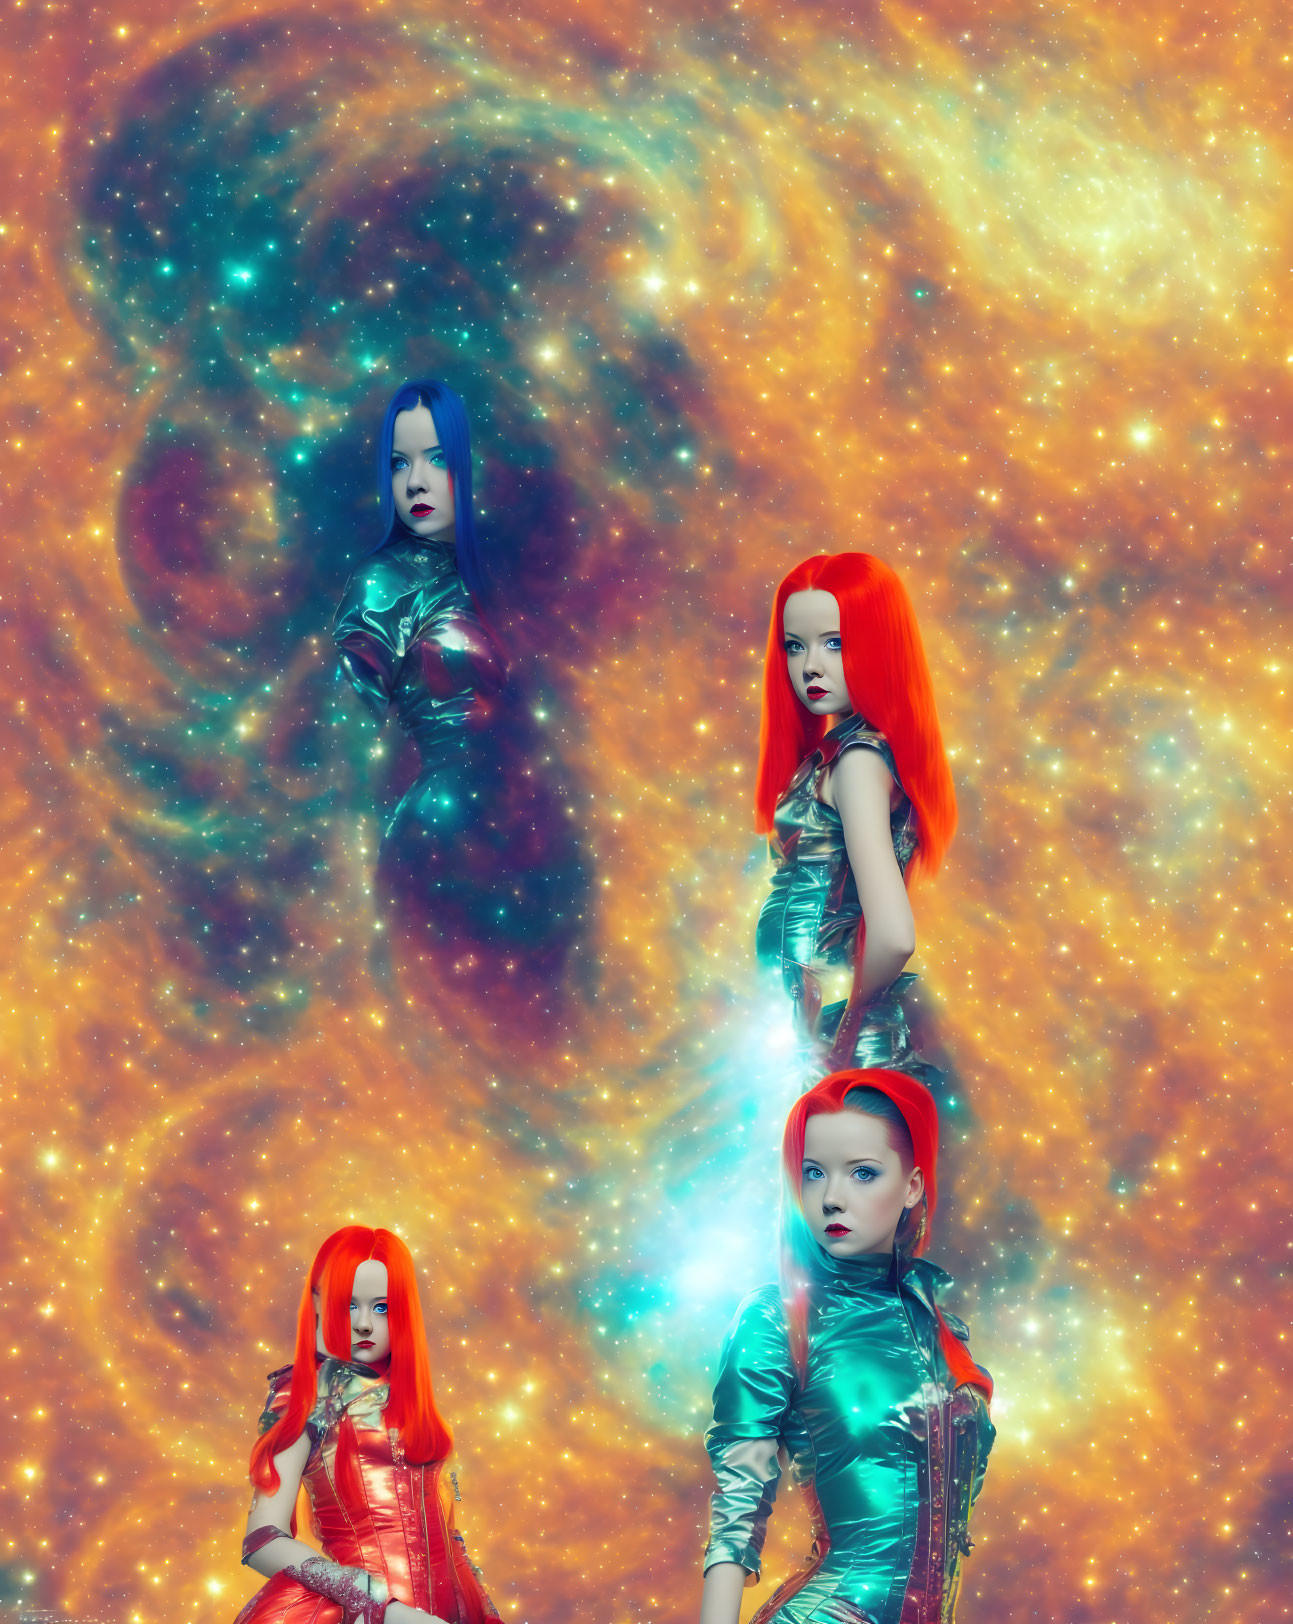 Four Women in Colorful Hair & Futuristic Space Suits Against Cosmic Background